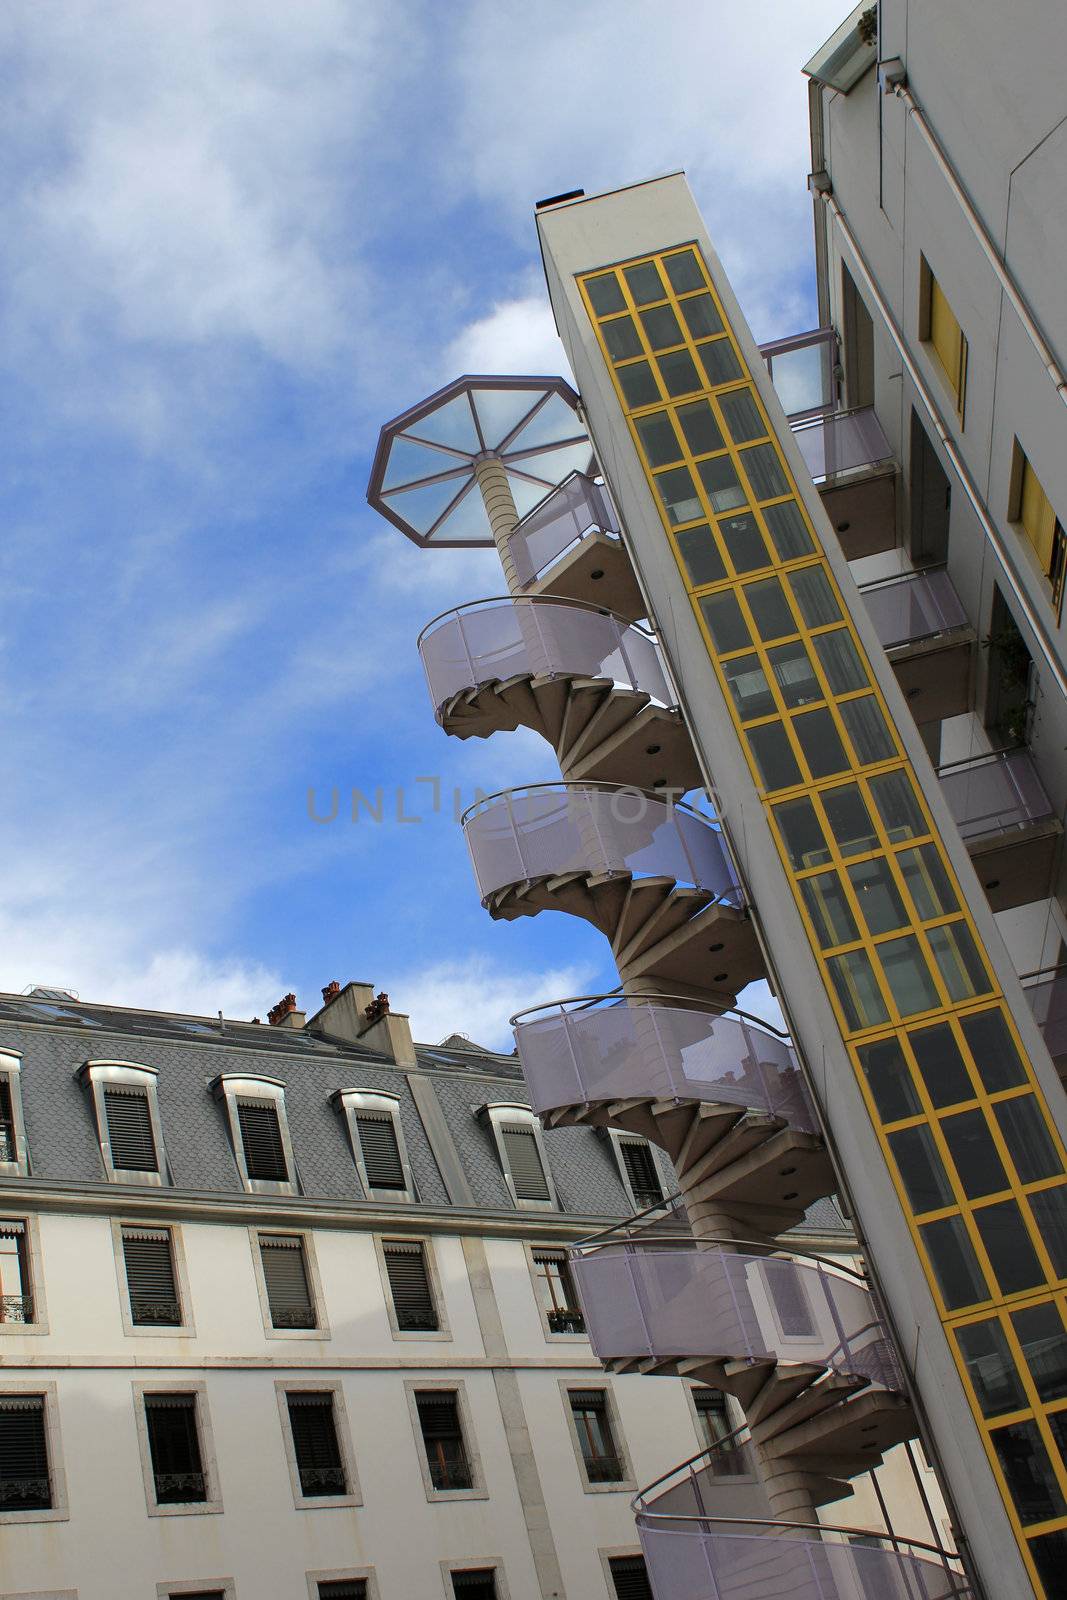 Design outside spiral staircase aside a modern building next to another old one